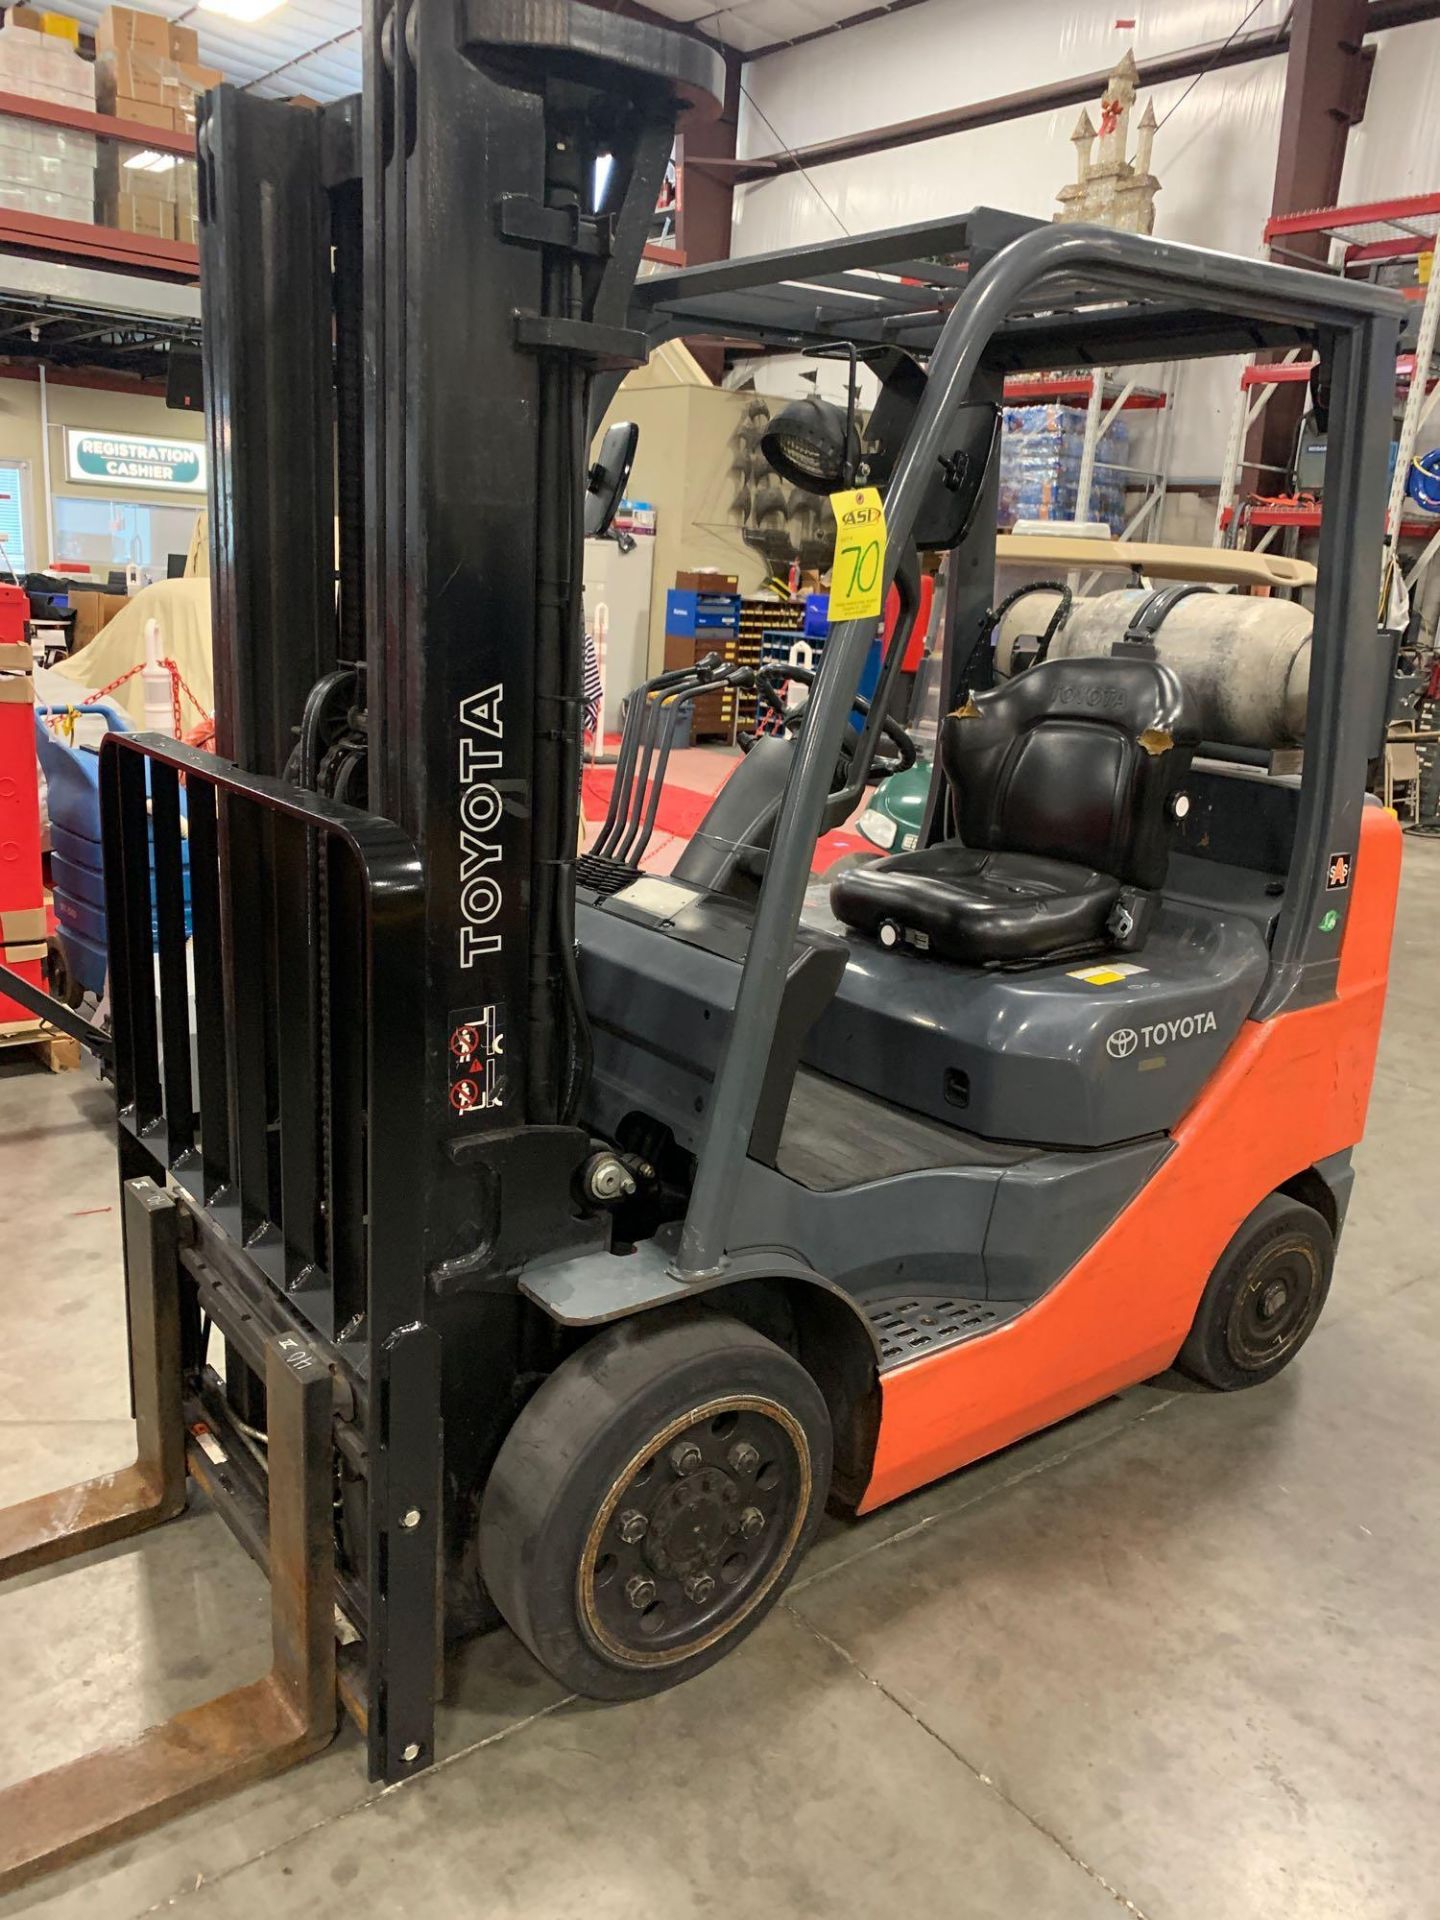 TOYOTA 8FGCU25 LP GAS FORKLIFT, APPROX 5,000 LB CAPACITY, TILT, SIDESHIFT, RUNS AND OPERATES - Image 6 of 7